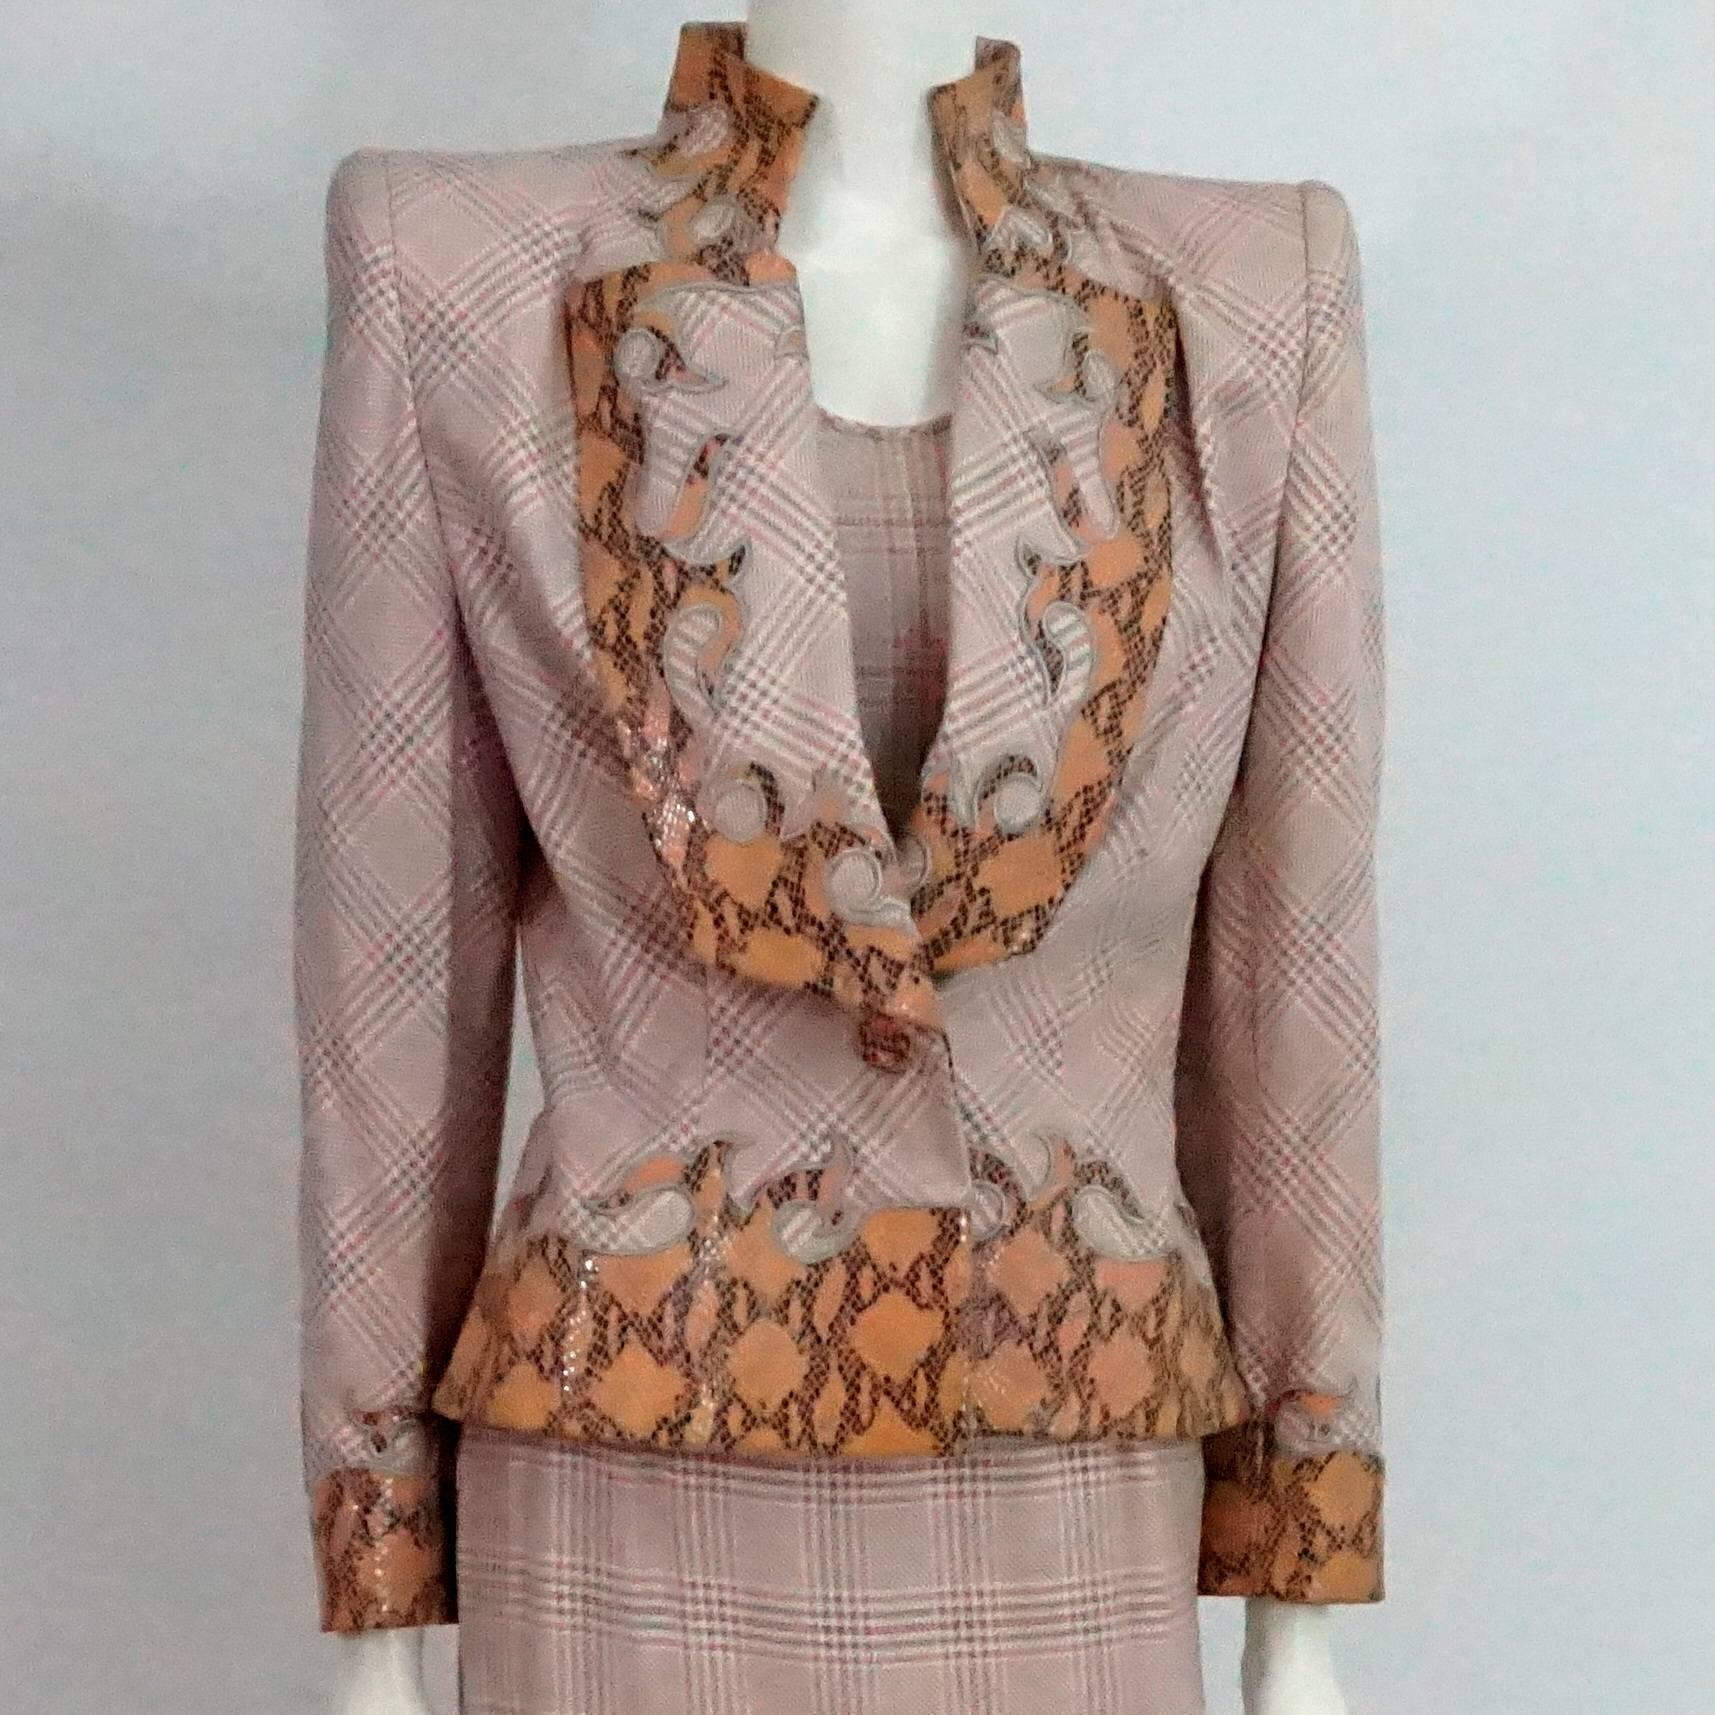 Women's Givenchy Couture Pink Houndstooth Skirt Suit and Top with Snake Detail, 1990s